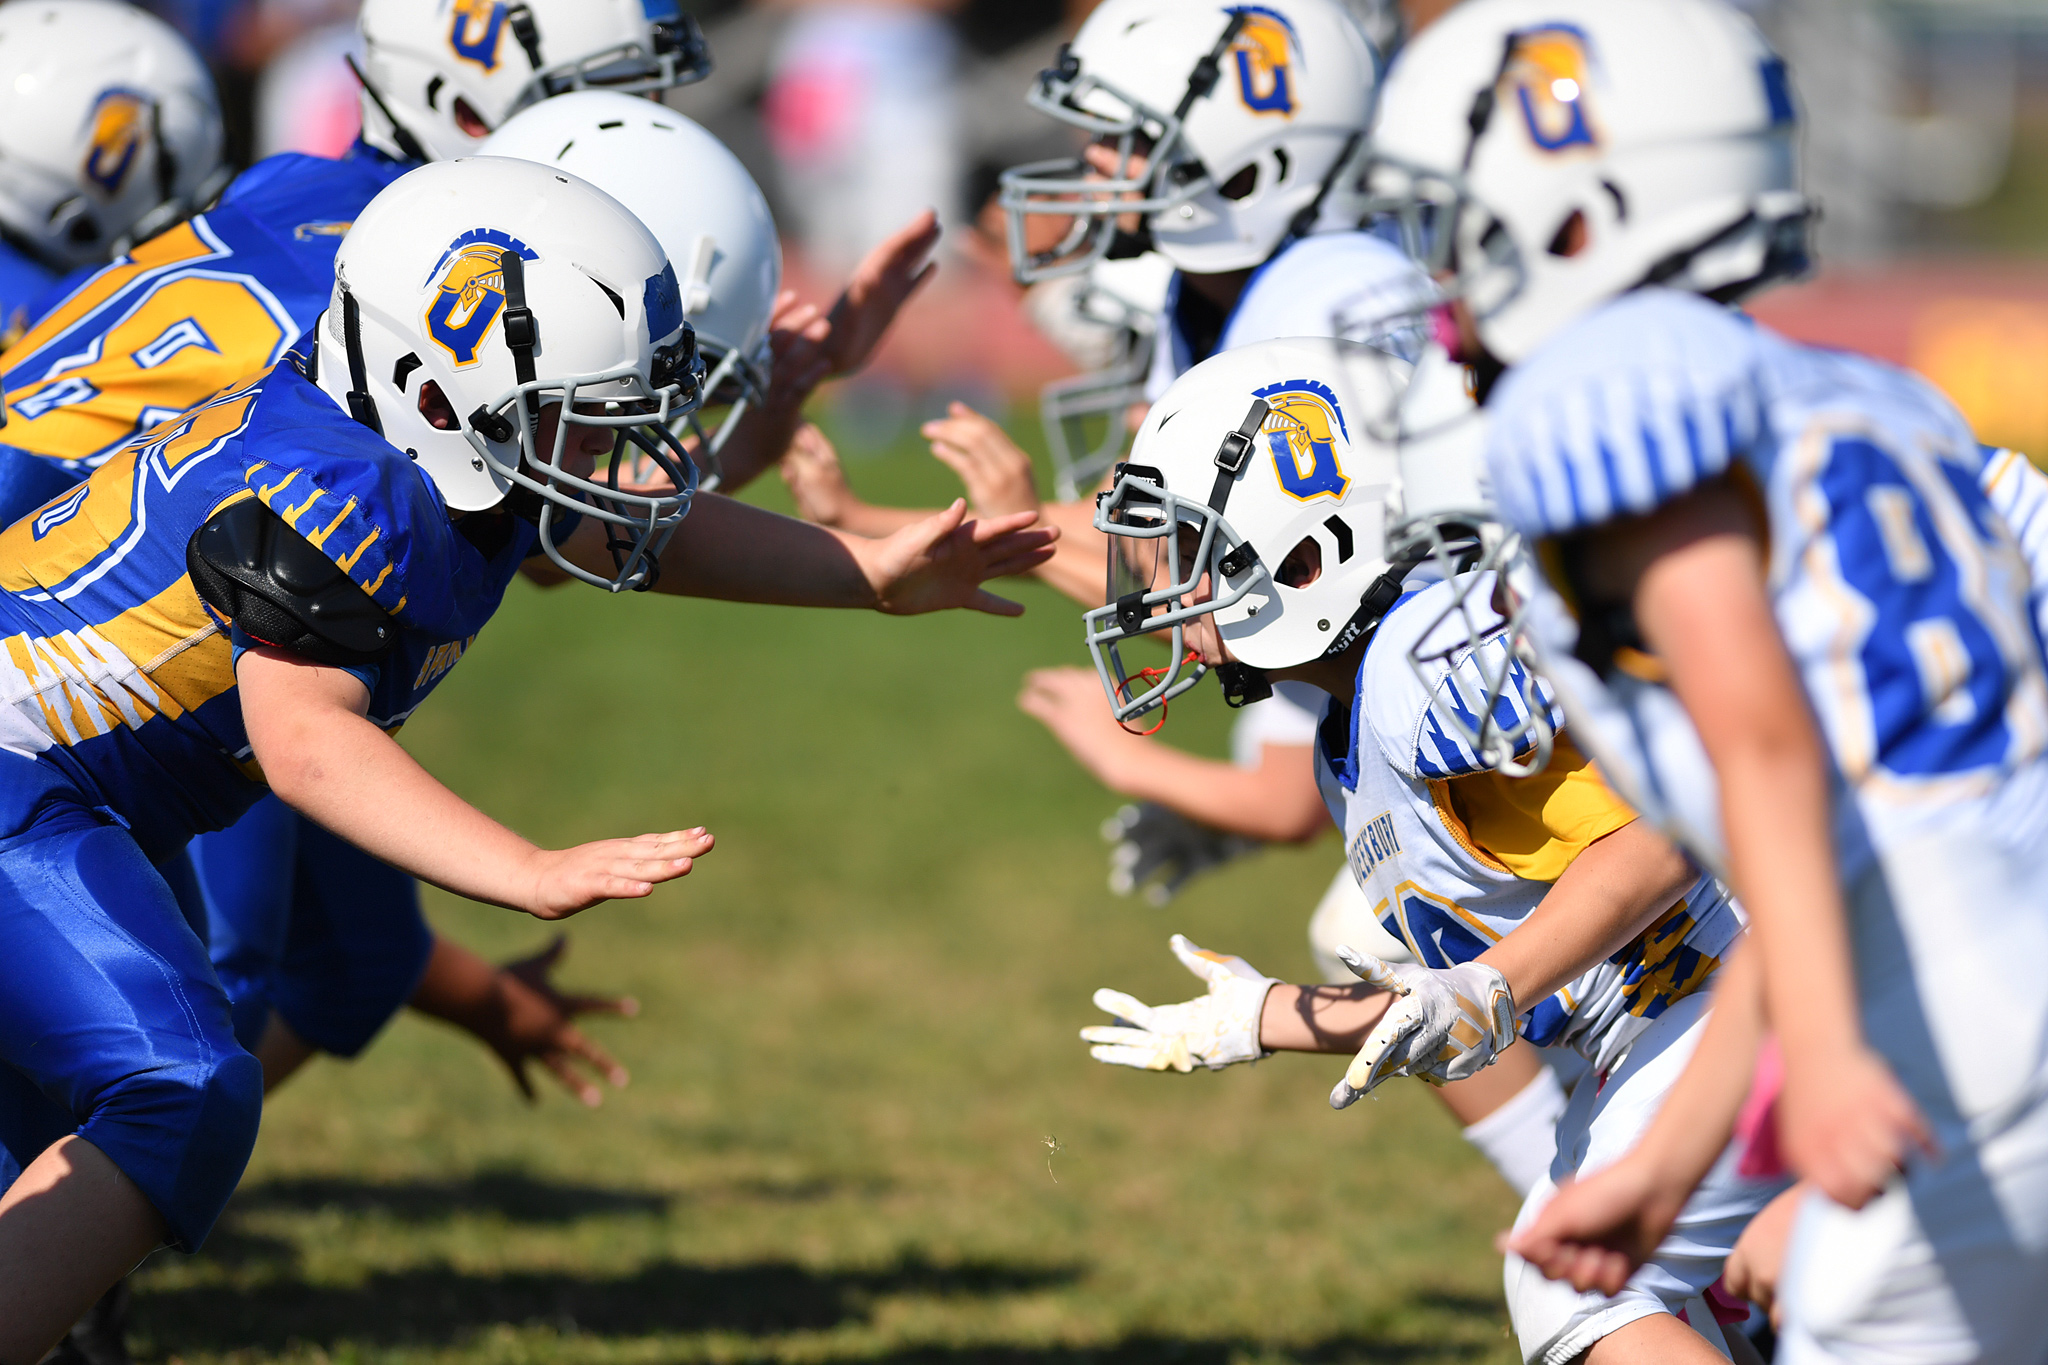 QUEENSBURY YOUTH FOOTBALL